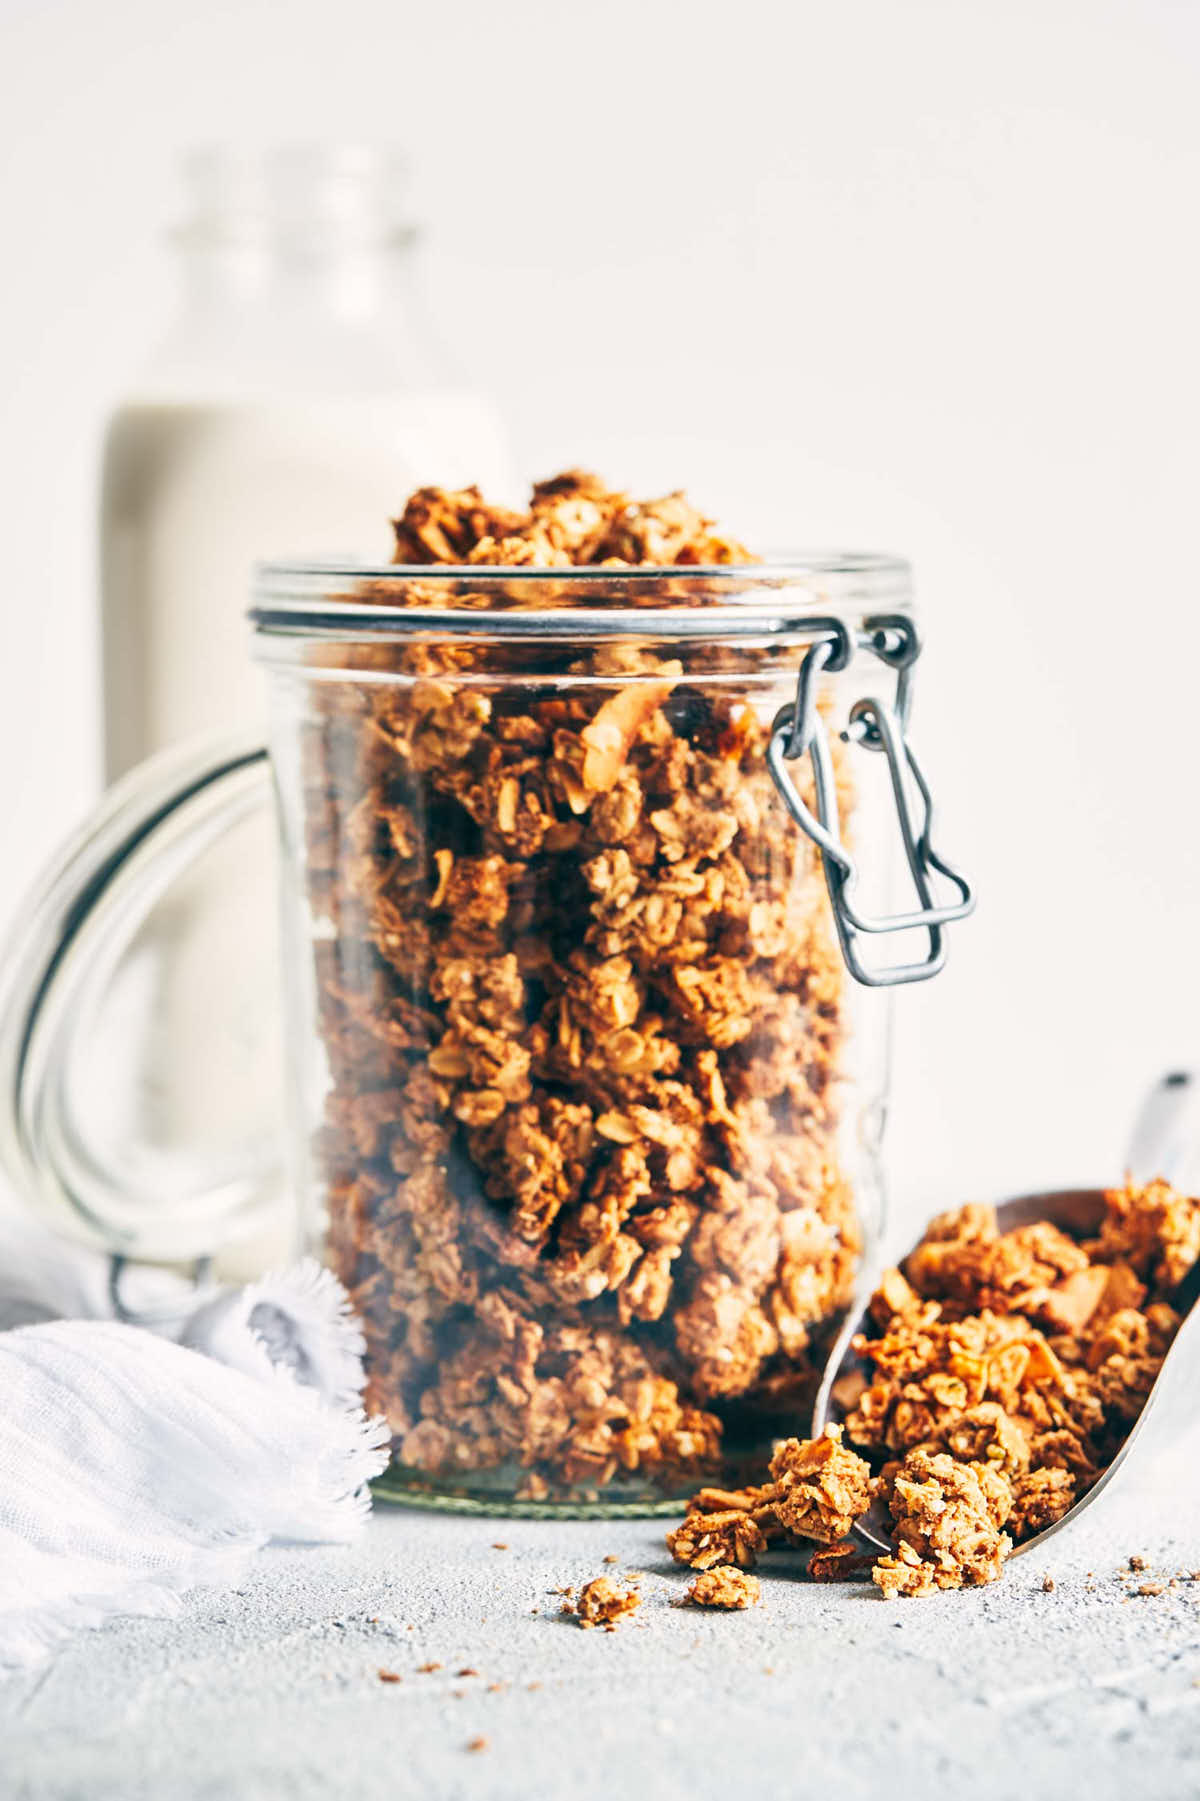 Nut pulp granola is a storage container with a scoop